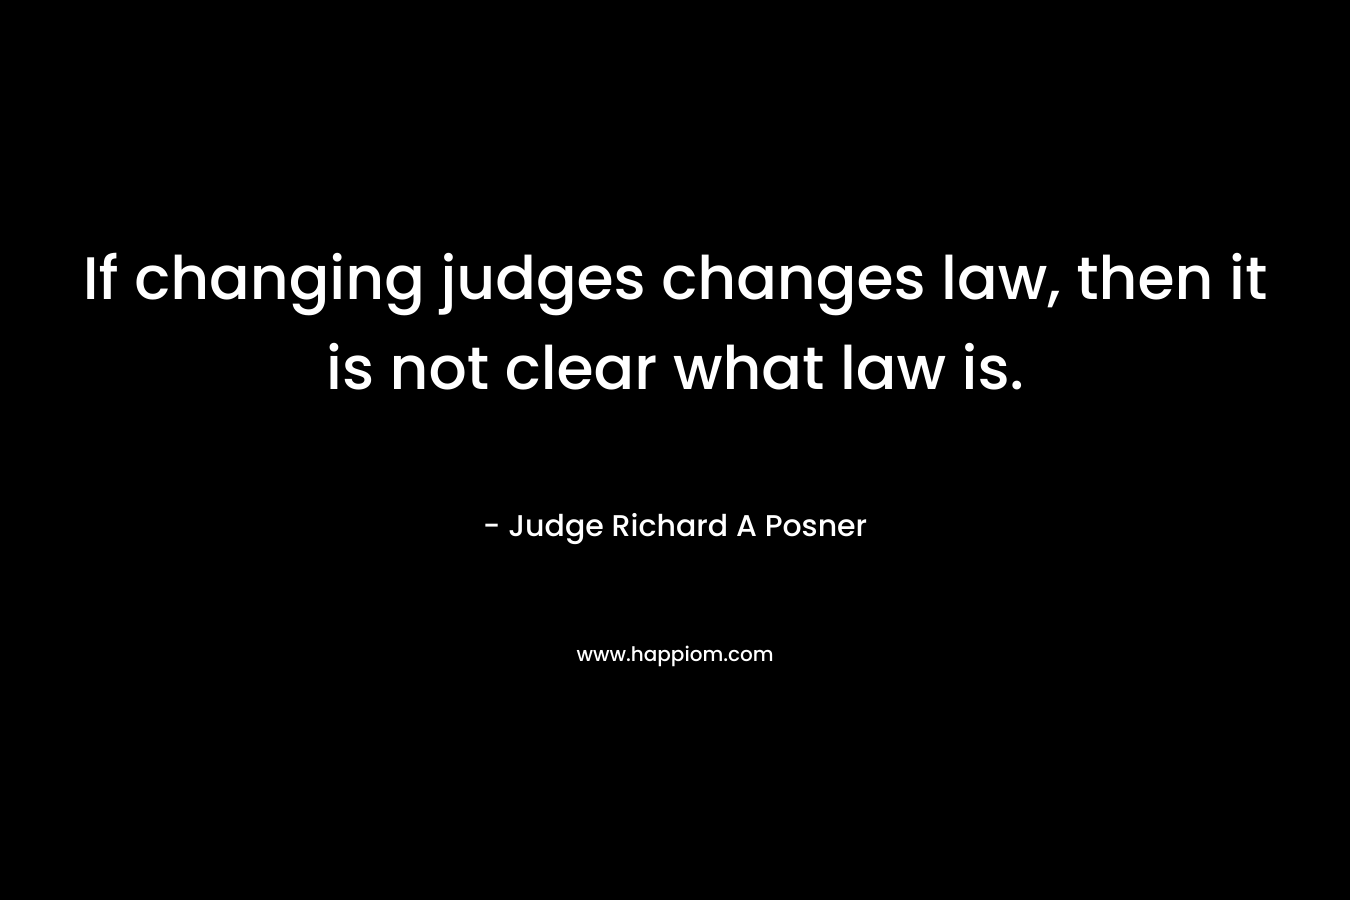 If changing judges changes law, then it is not clear what law is.